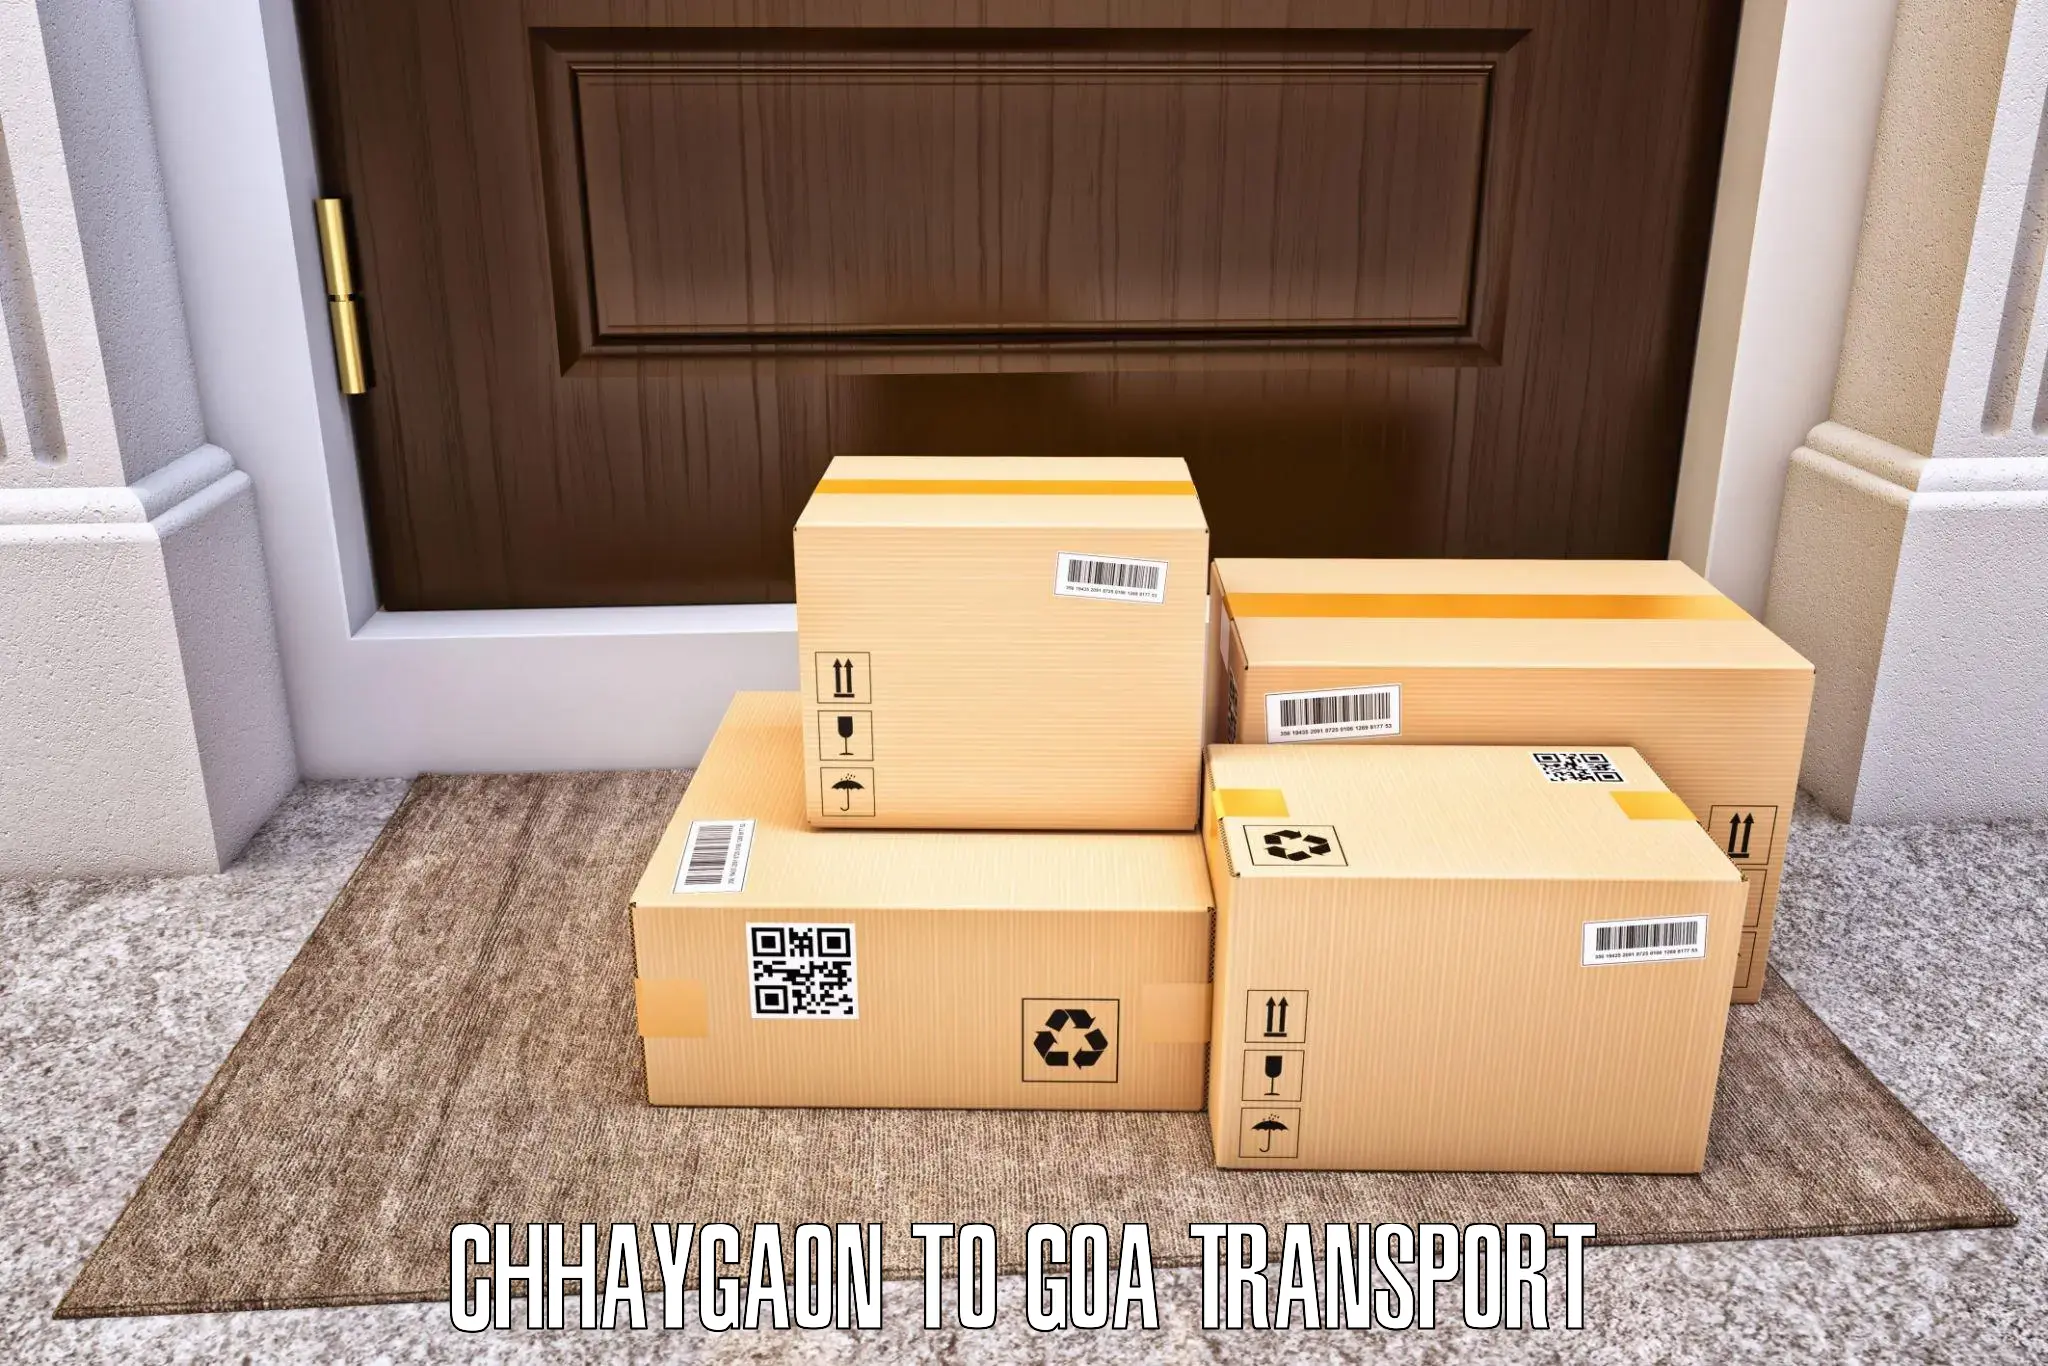 Domestic goods transportation services Chhaygaon to Bicholim